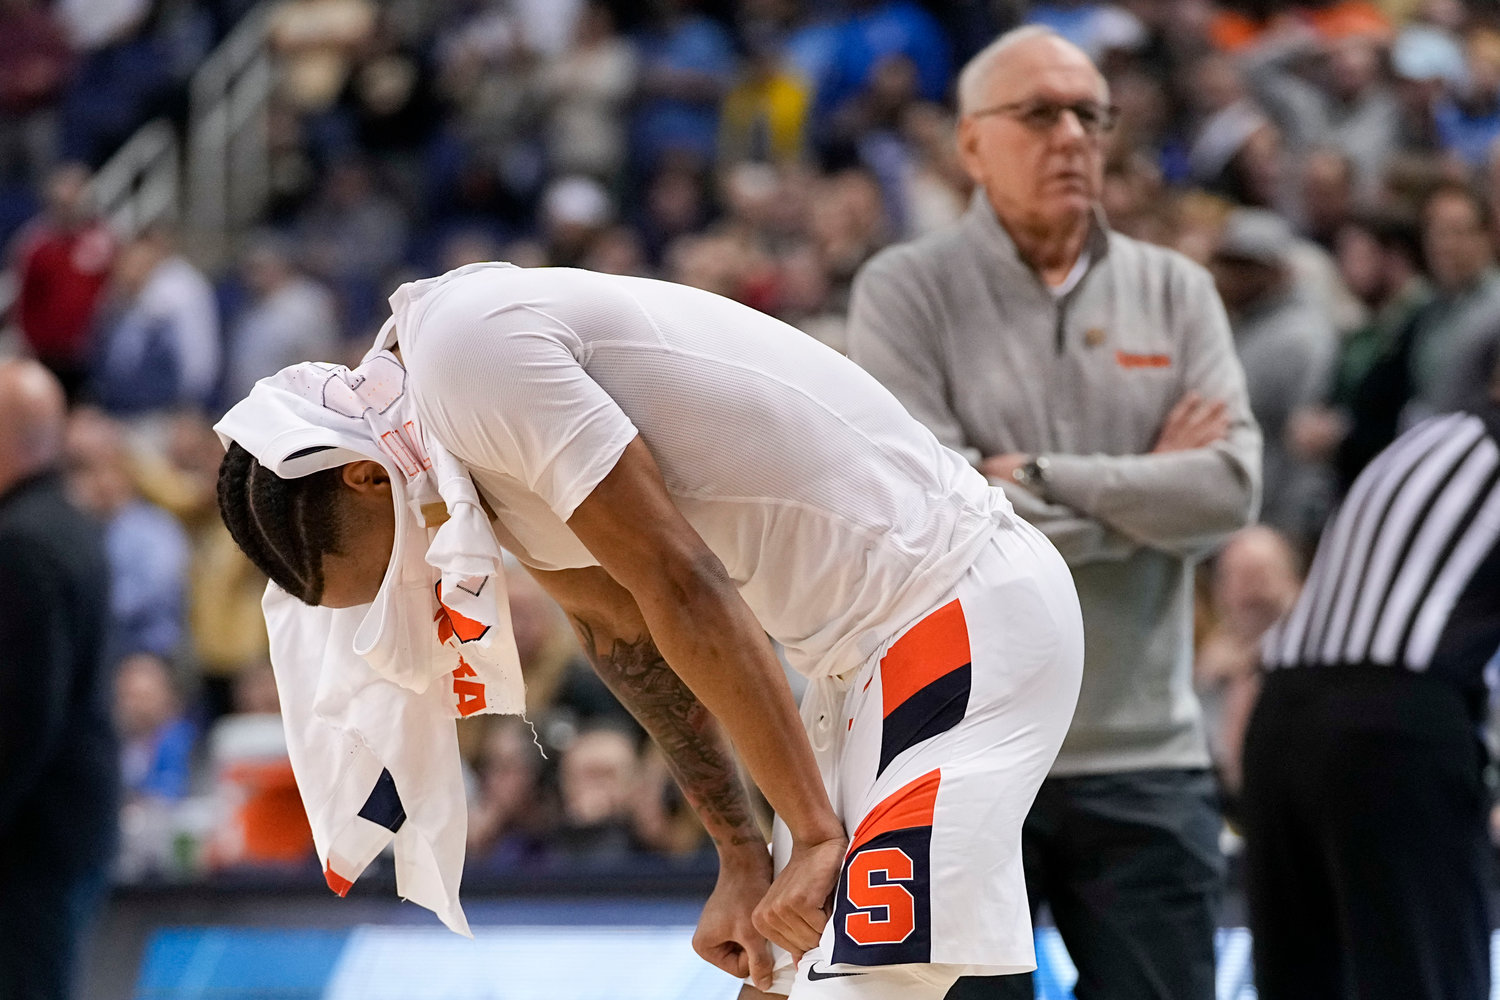 Syracuse guard Judah Mintz reacts after their loss against Wake Forest during a second round game of the Atlantic Coast Conference Tournament on Wednesday afternoon in Greensboro, N.C. The Orange lost 77-74.